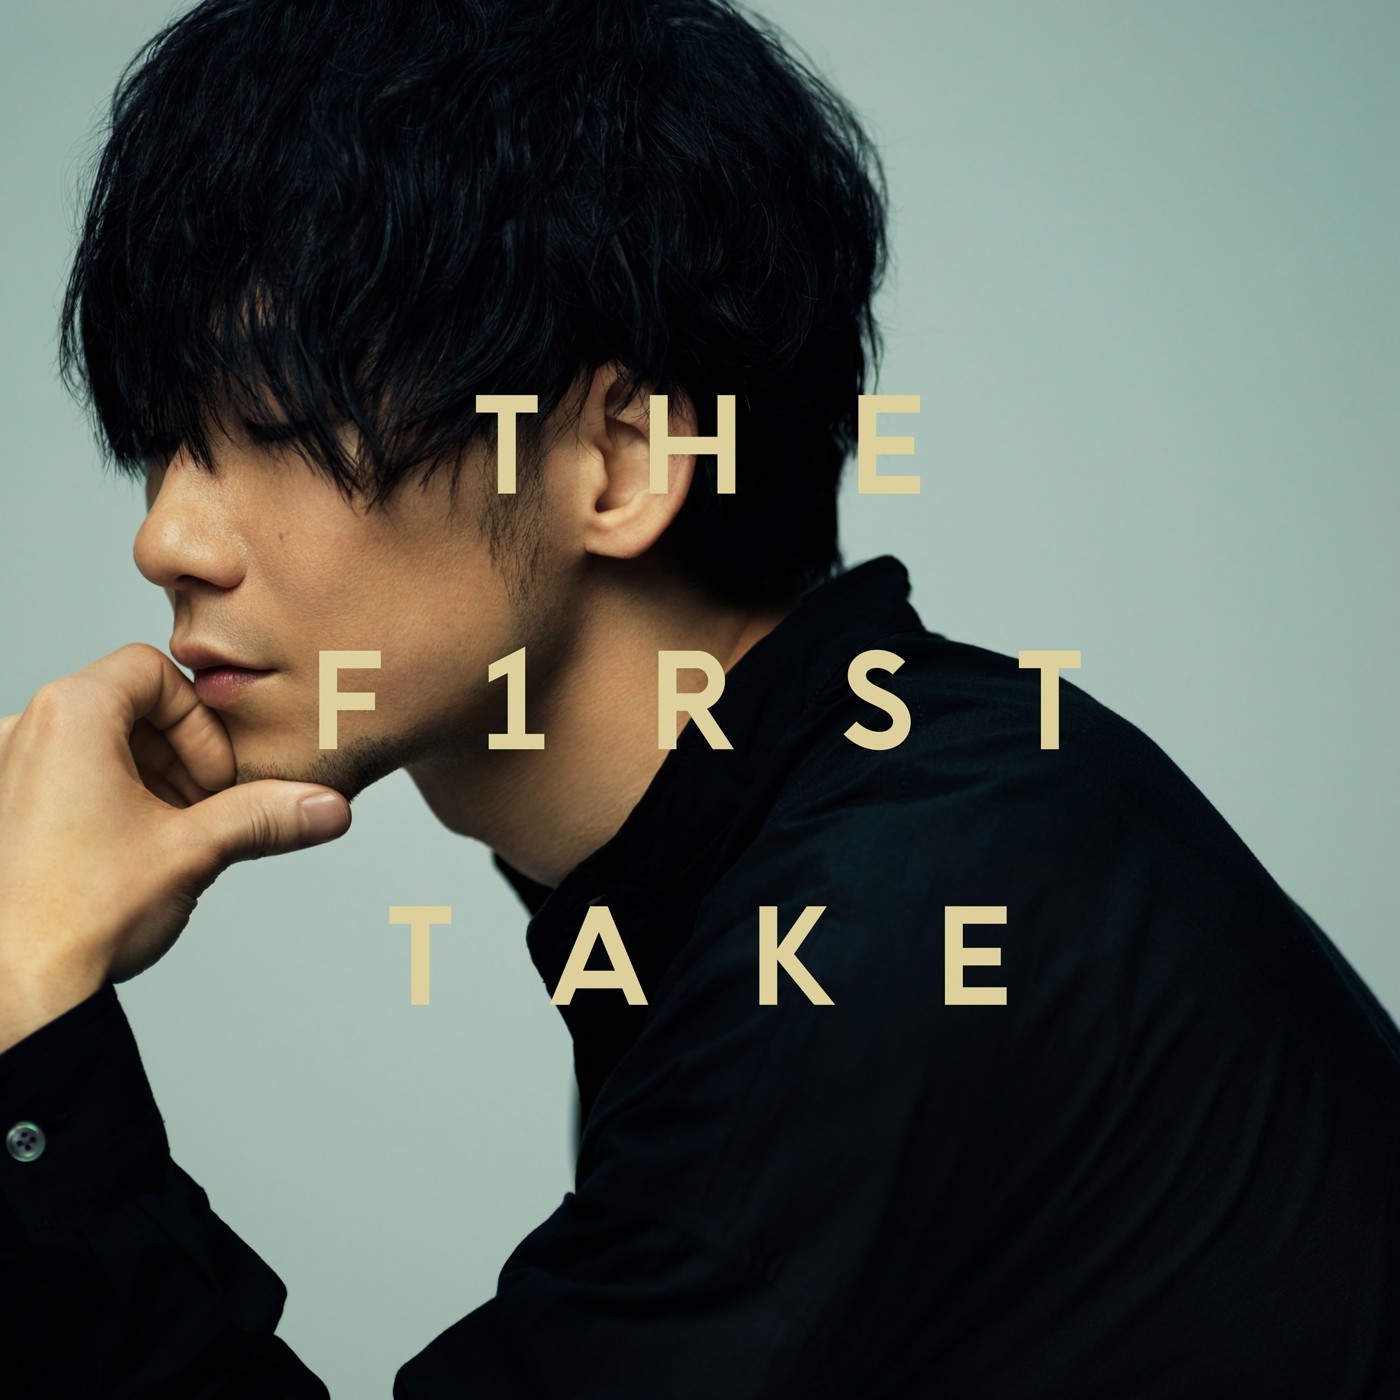 TK from 凛として時雨 – unravel – From THE FIRST TAKE [FLAC 24bit/96kHz]